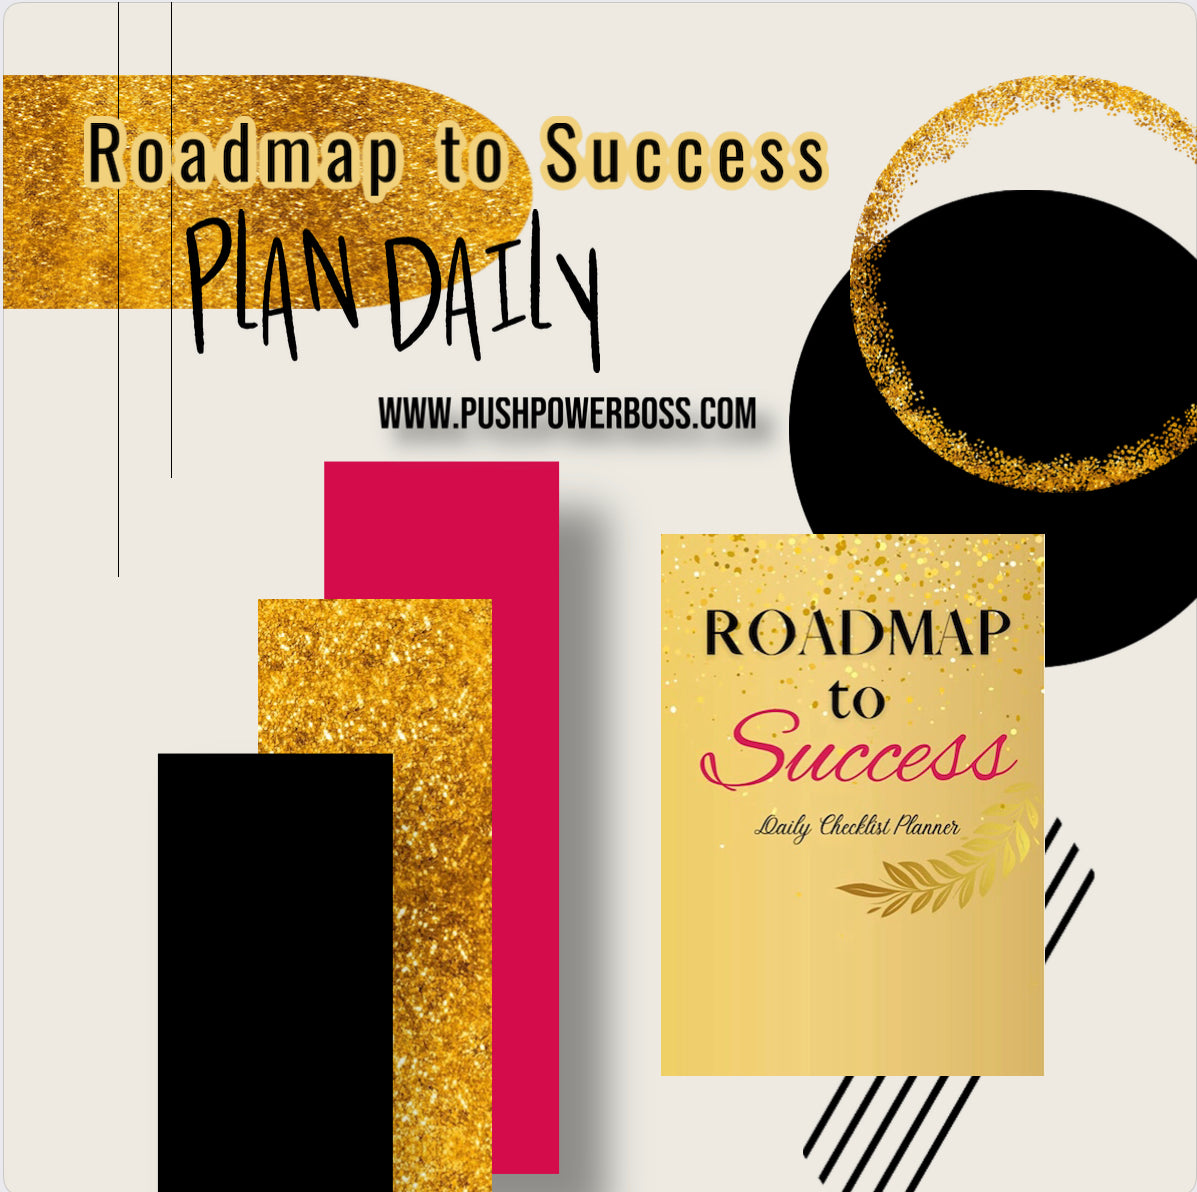 Roadmap to Success Daily Checklist Planner ~hardcover format~